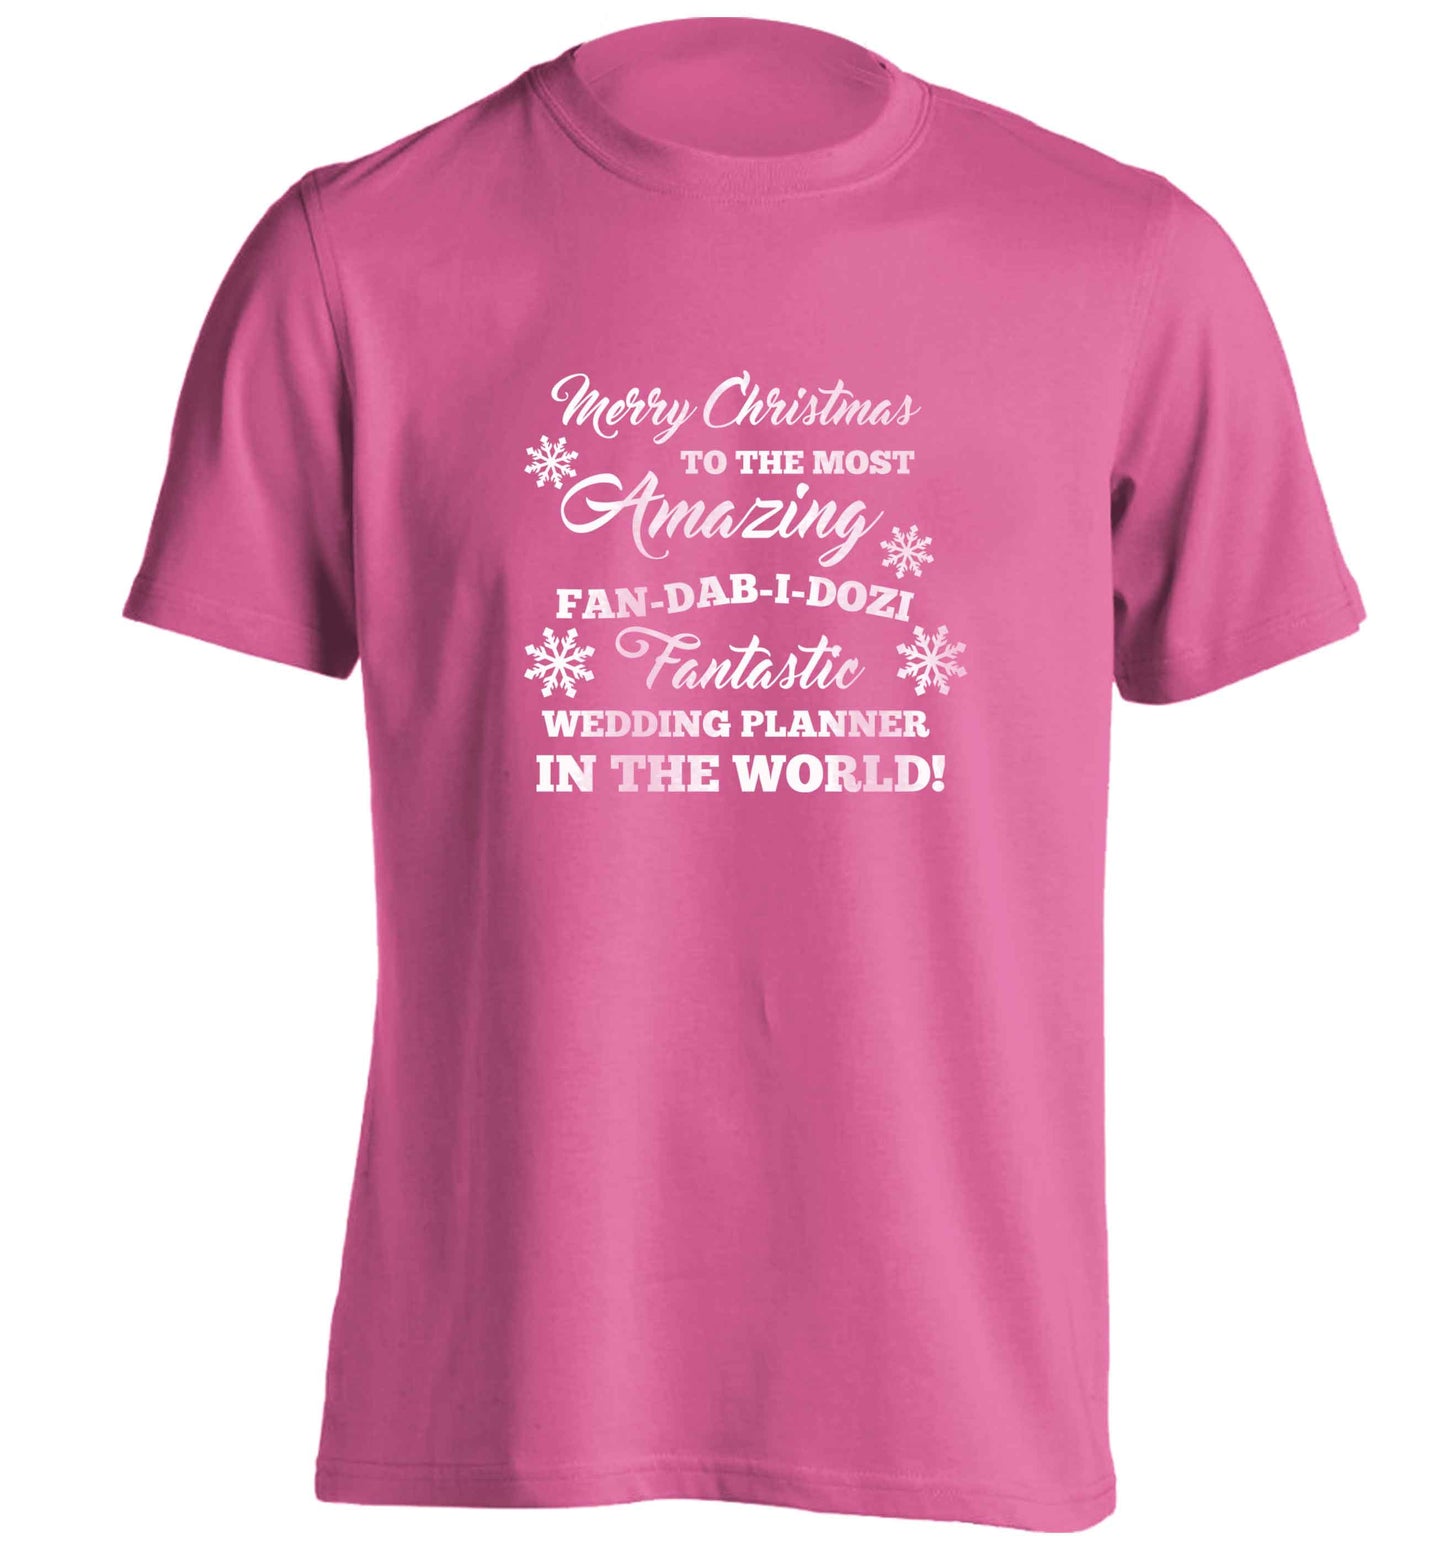 Merry Christmas to the most amazing fan-dab-i-dozi fantasic wedding planner in the world adults unisex pink Tshirt 2XL